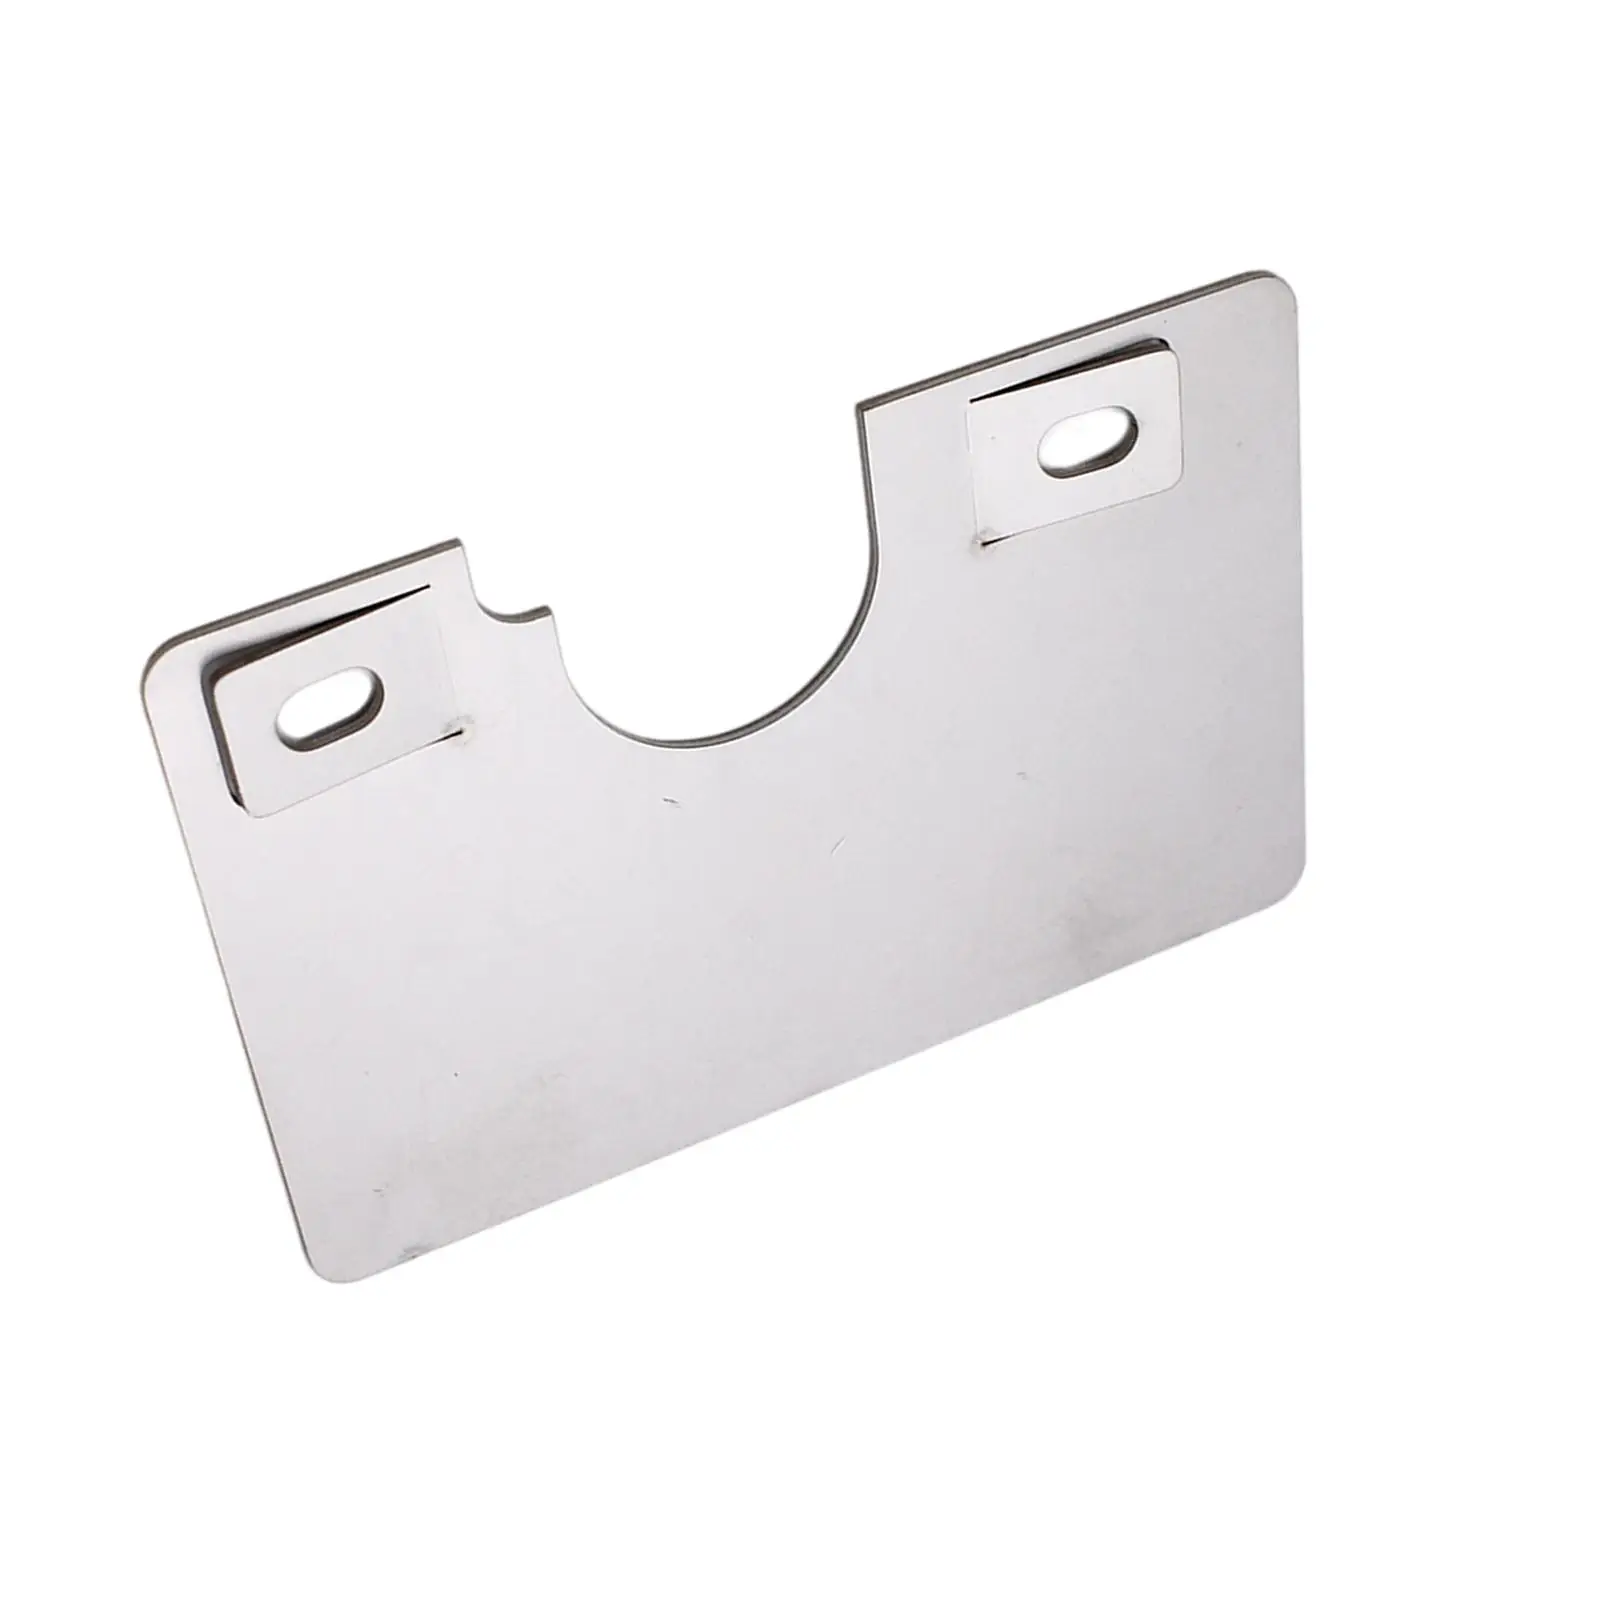  Door Protective Device Anti Theft Device Burglary 290, prevents the door from punctured and 